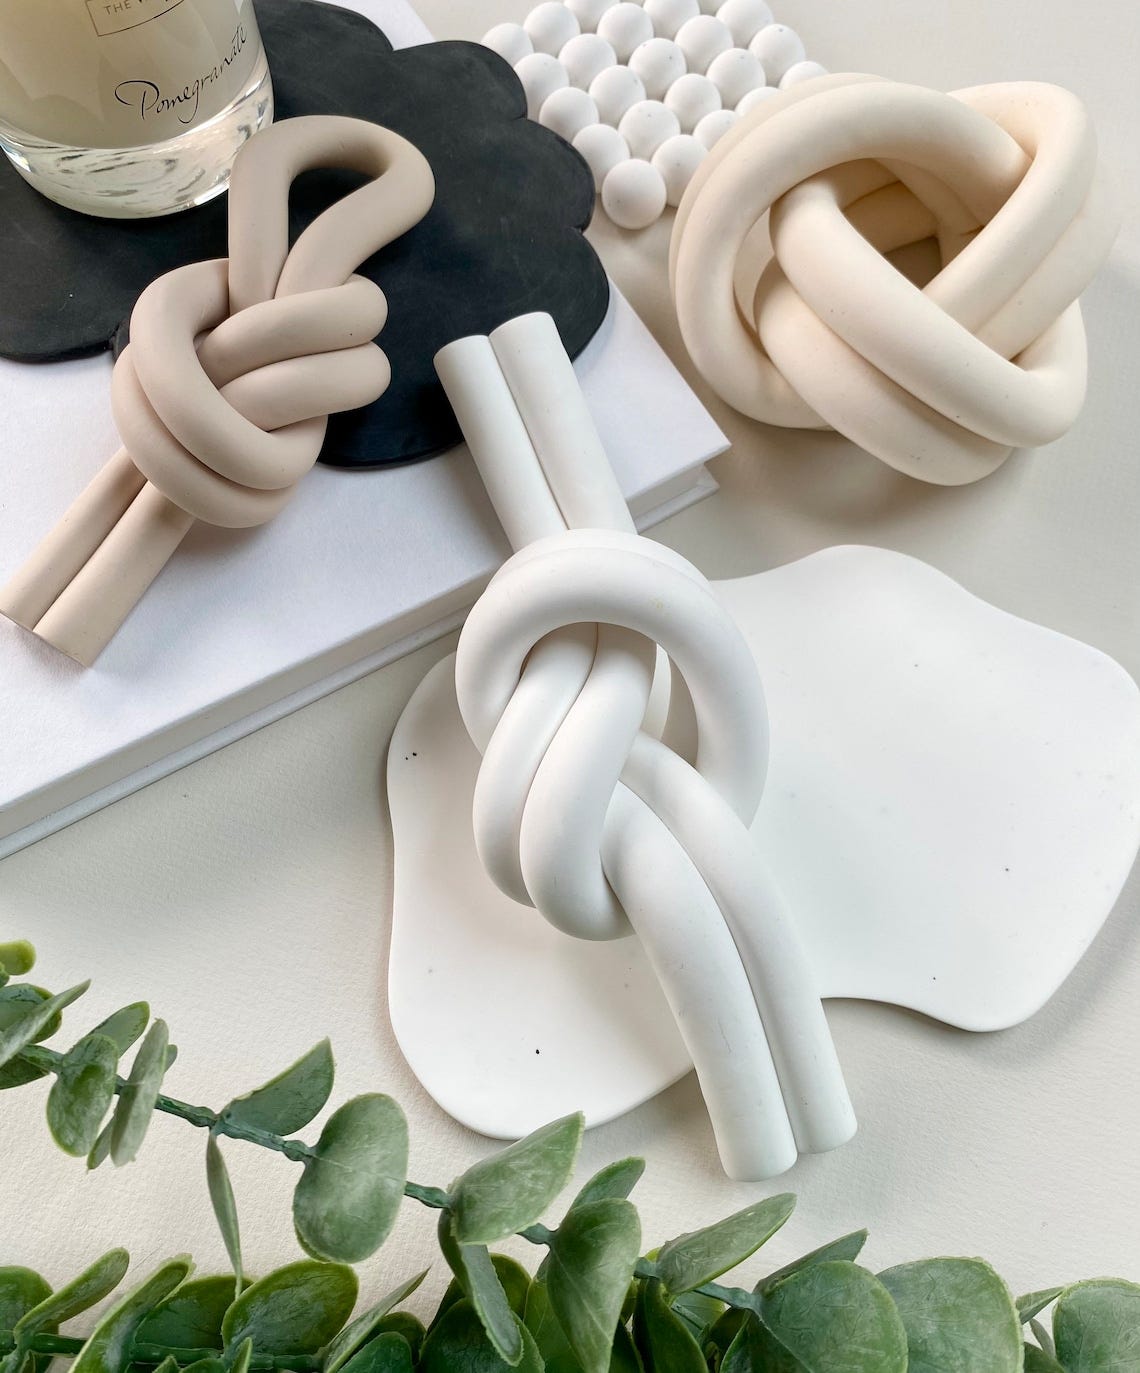 Clay knot  Home decor  Paper weight  shelf decor  knot image 1